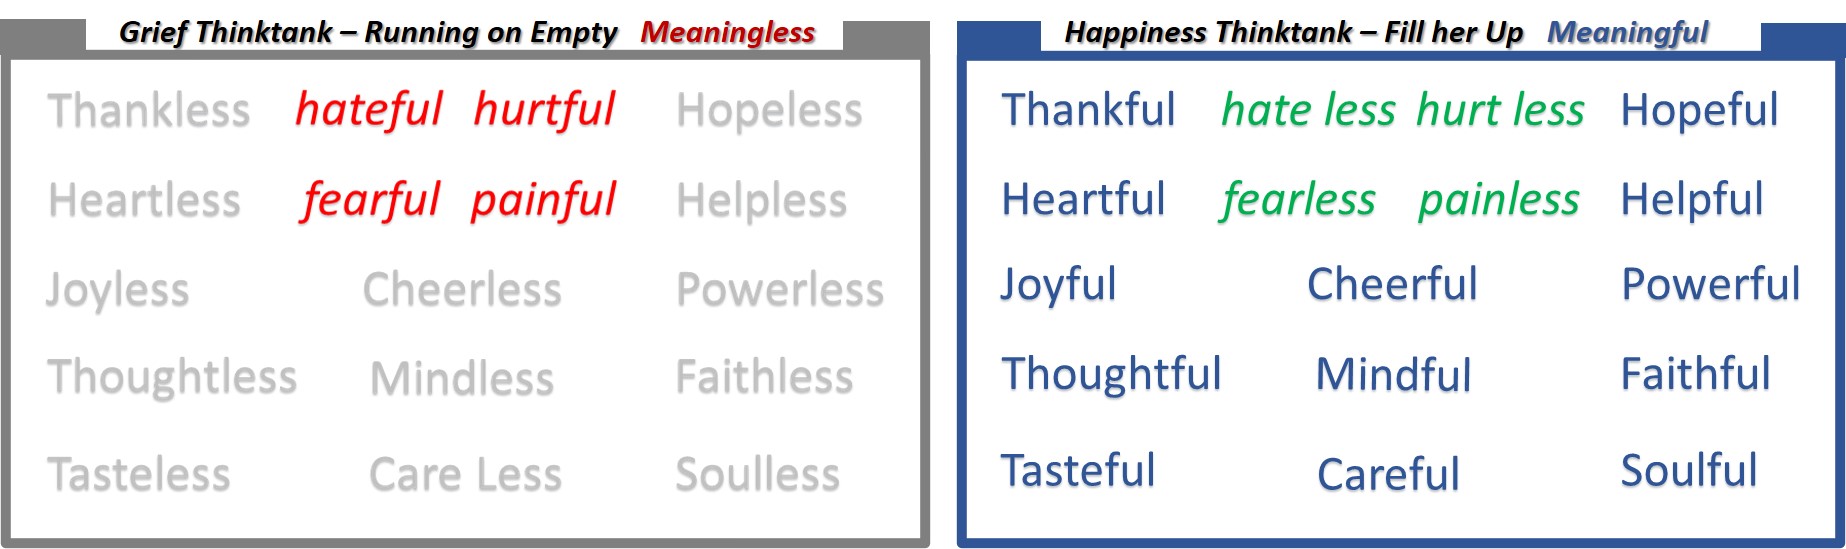 ABC's of Happiness